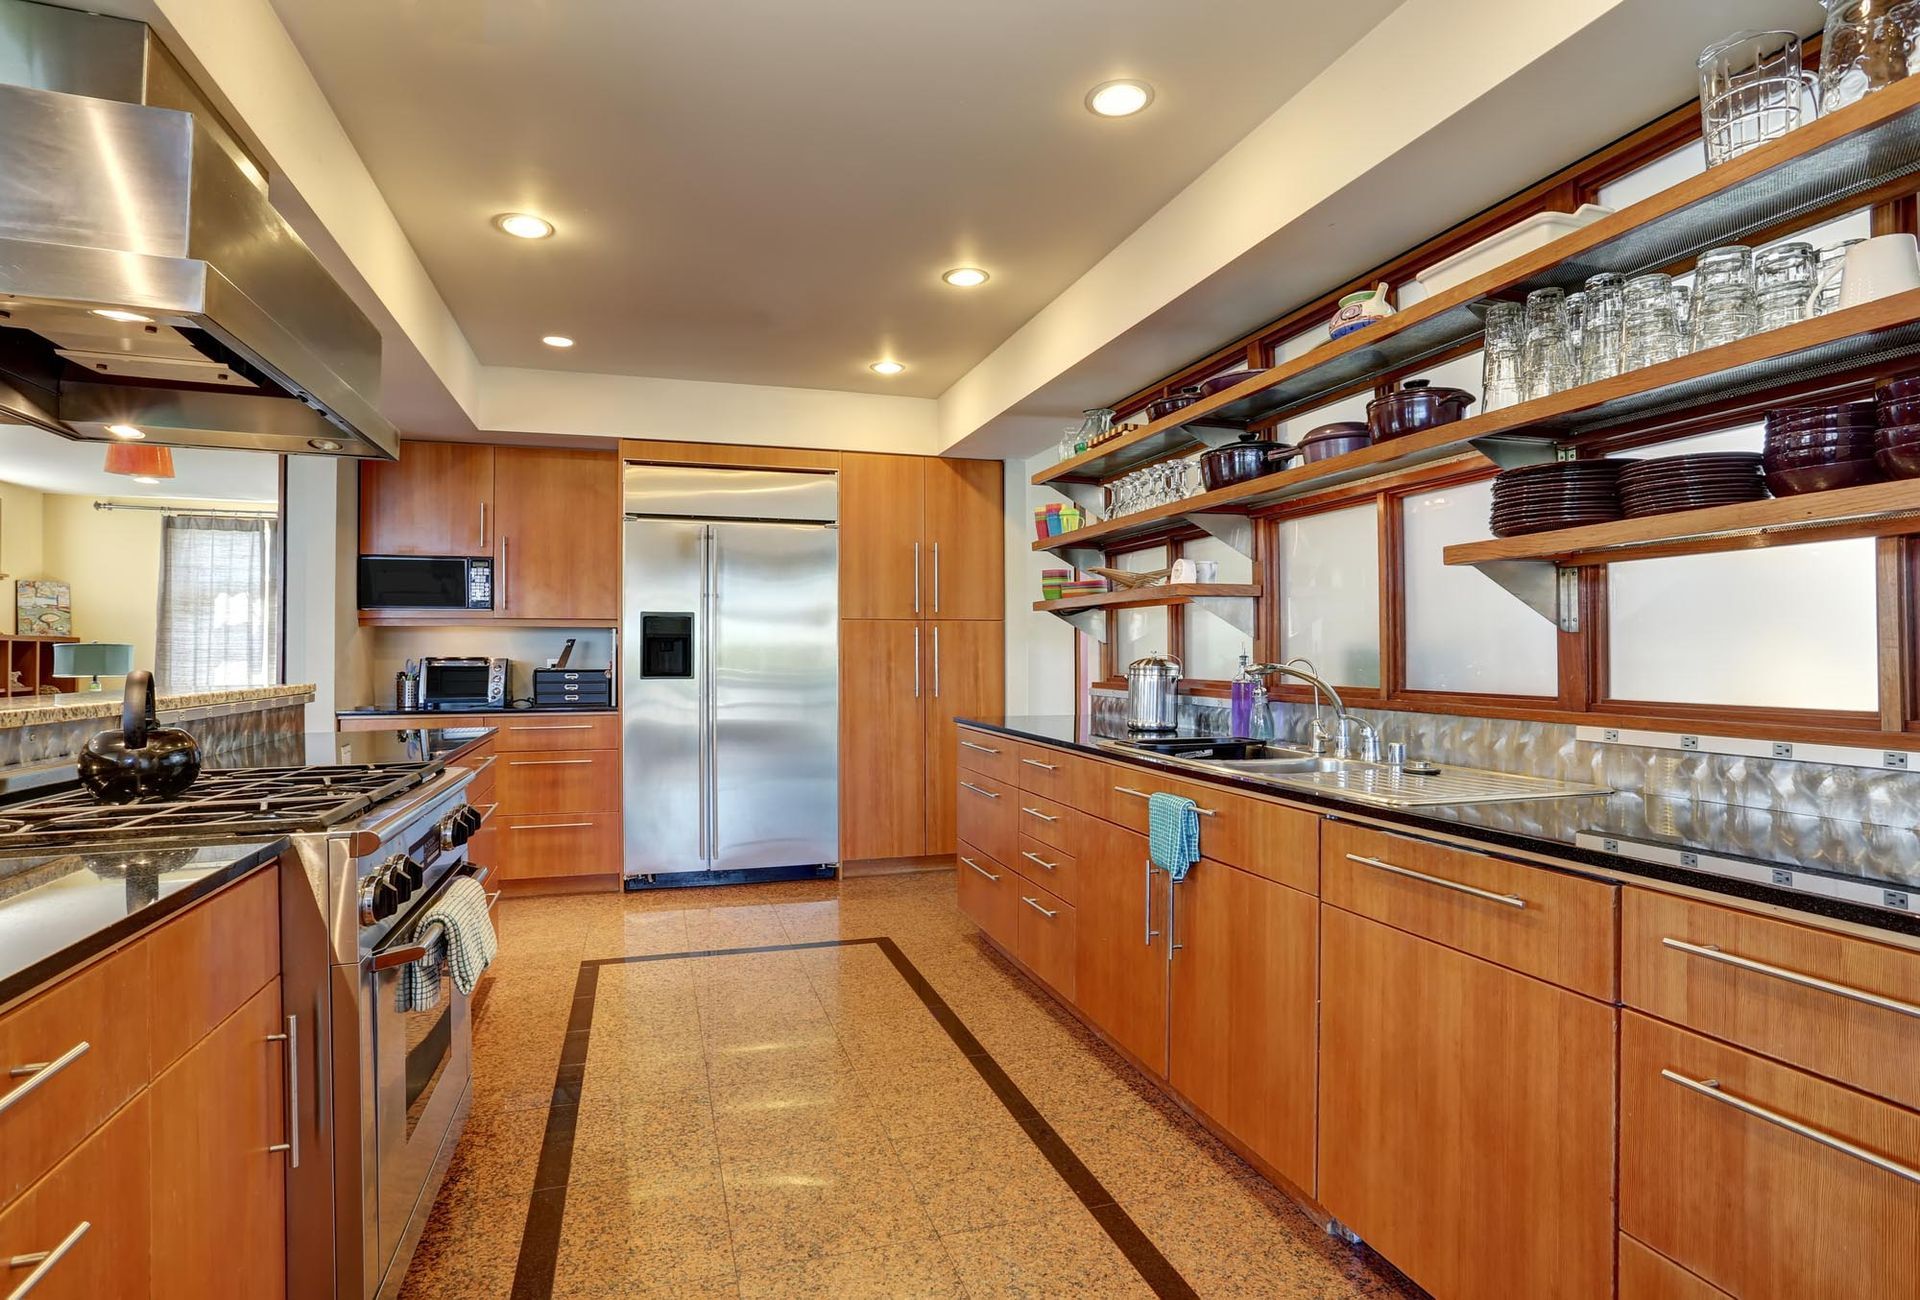 A kitchen with stainless steel appliances and wooden cabinets